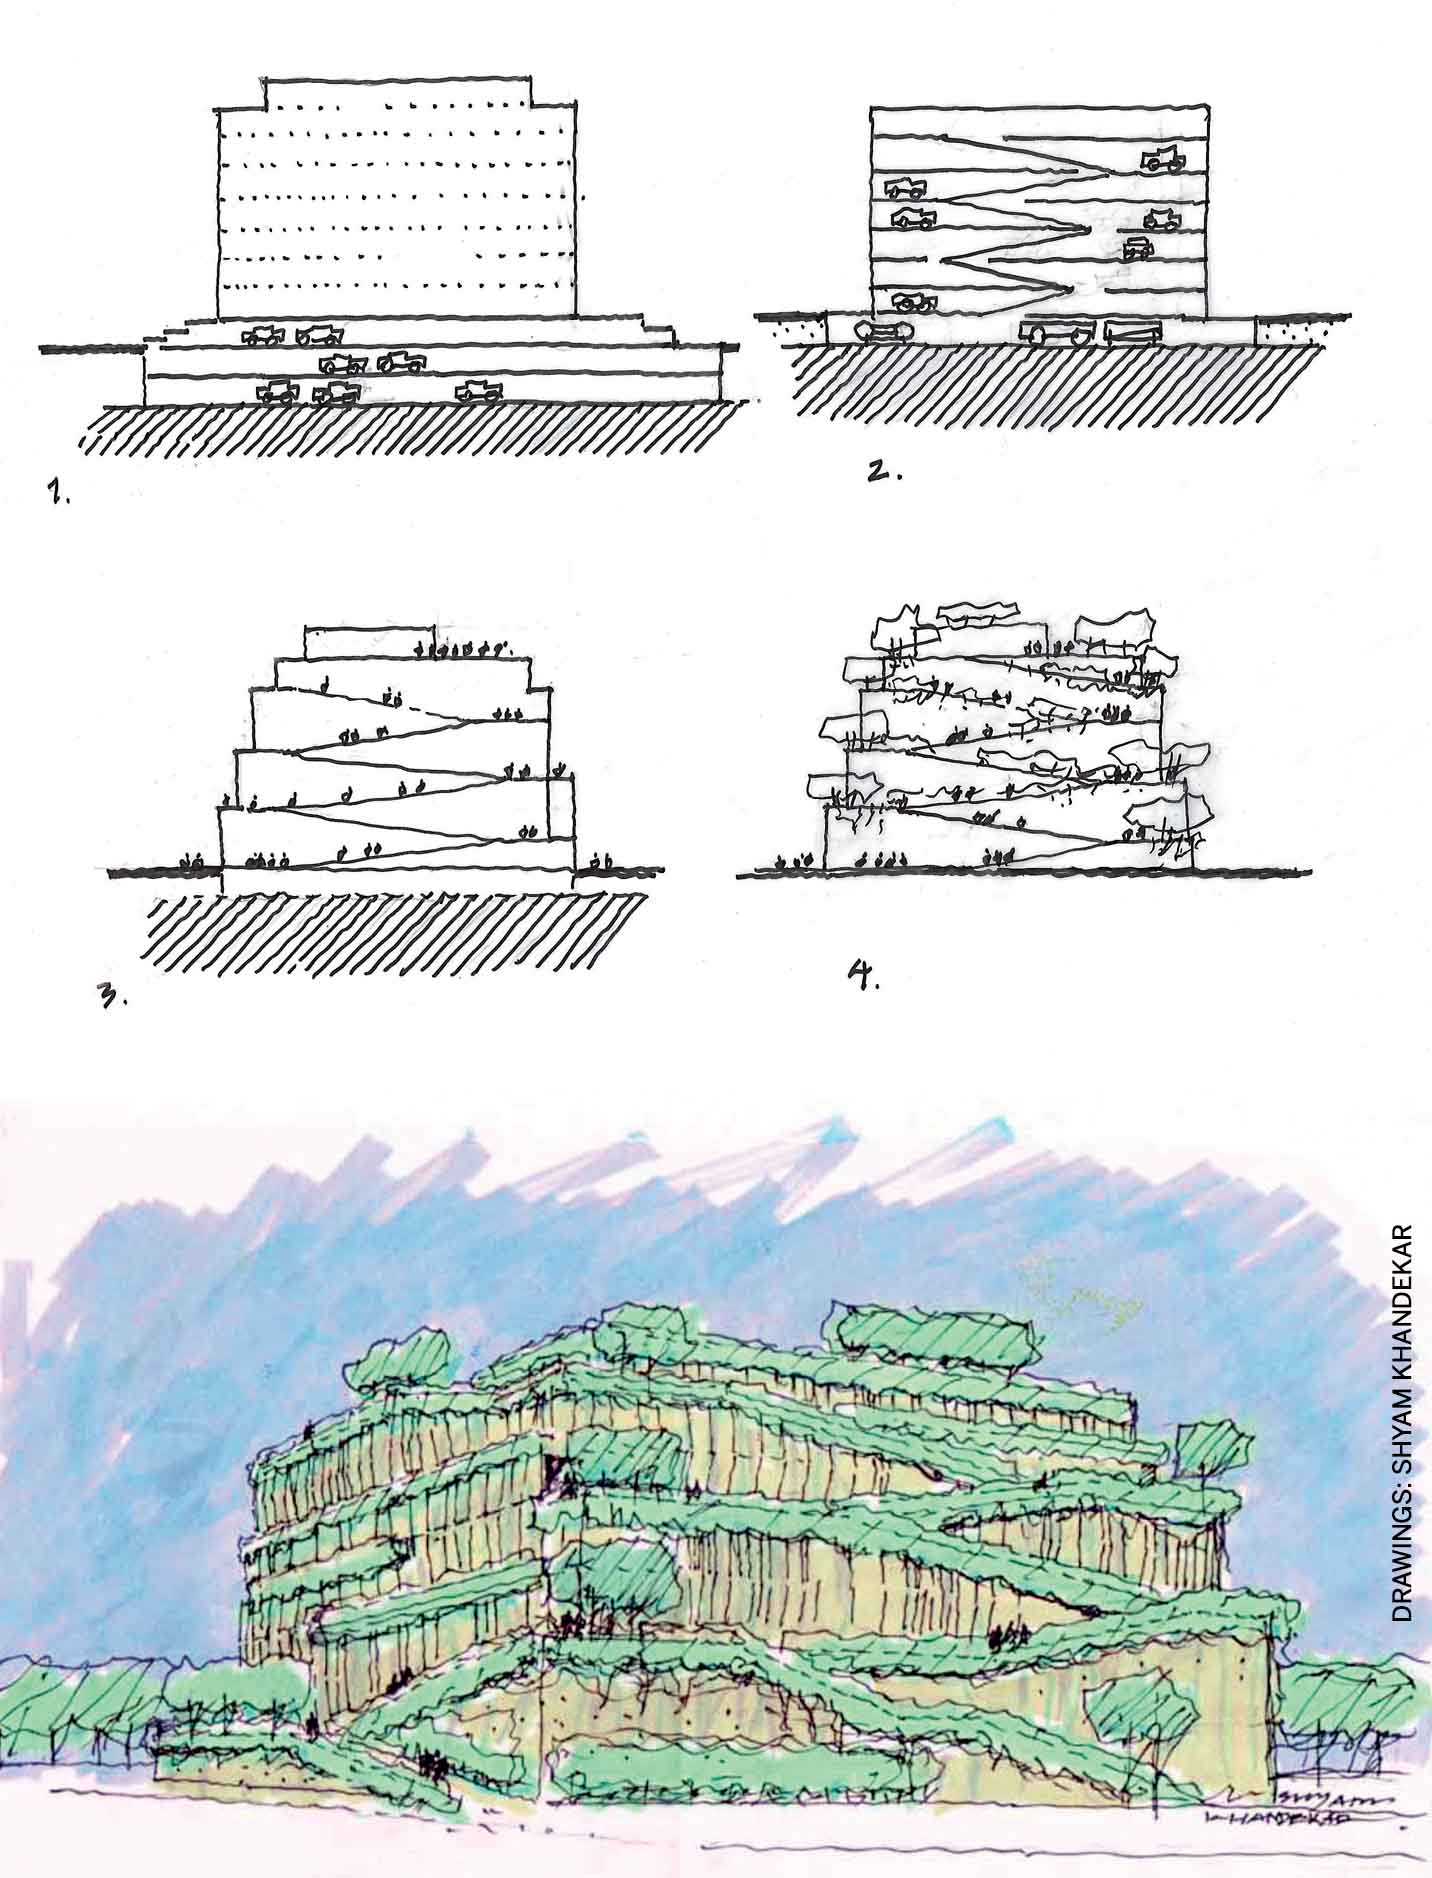 landscaping-multilayered-parking-structure-evolution-garage-rocky outcrop-office-building-with-few-layers-underground-presence-rock-closer-surface-pushes-structure-above-ground-moulded-climbable-pedestrians-landscaping-gives-look-conceptual-sketch